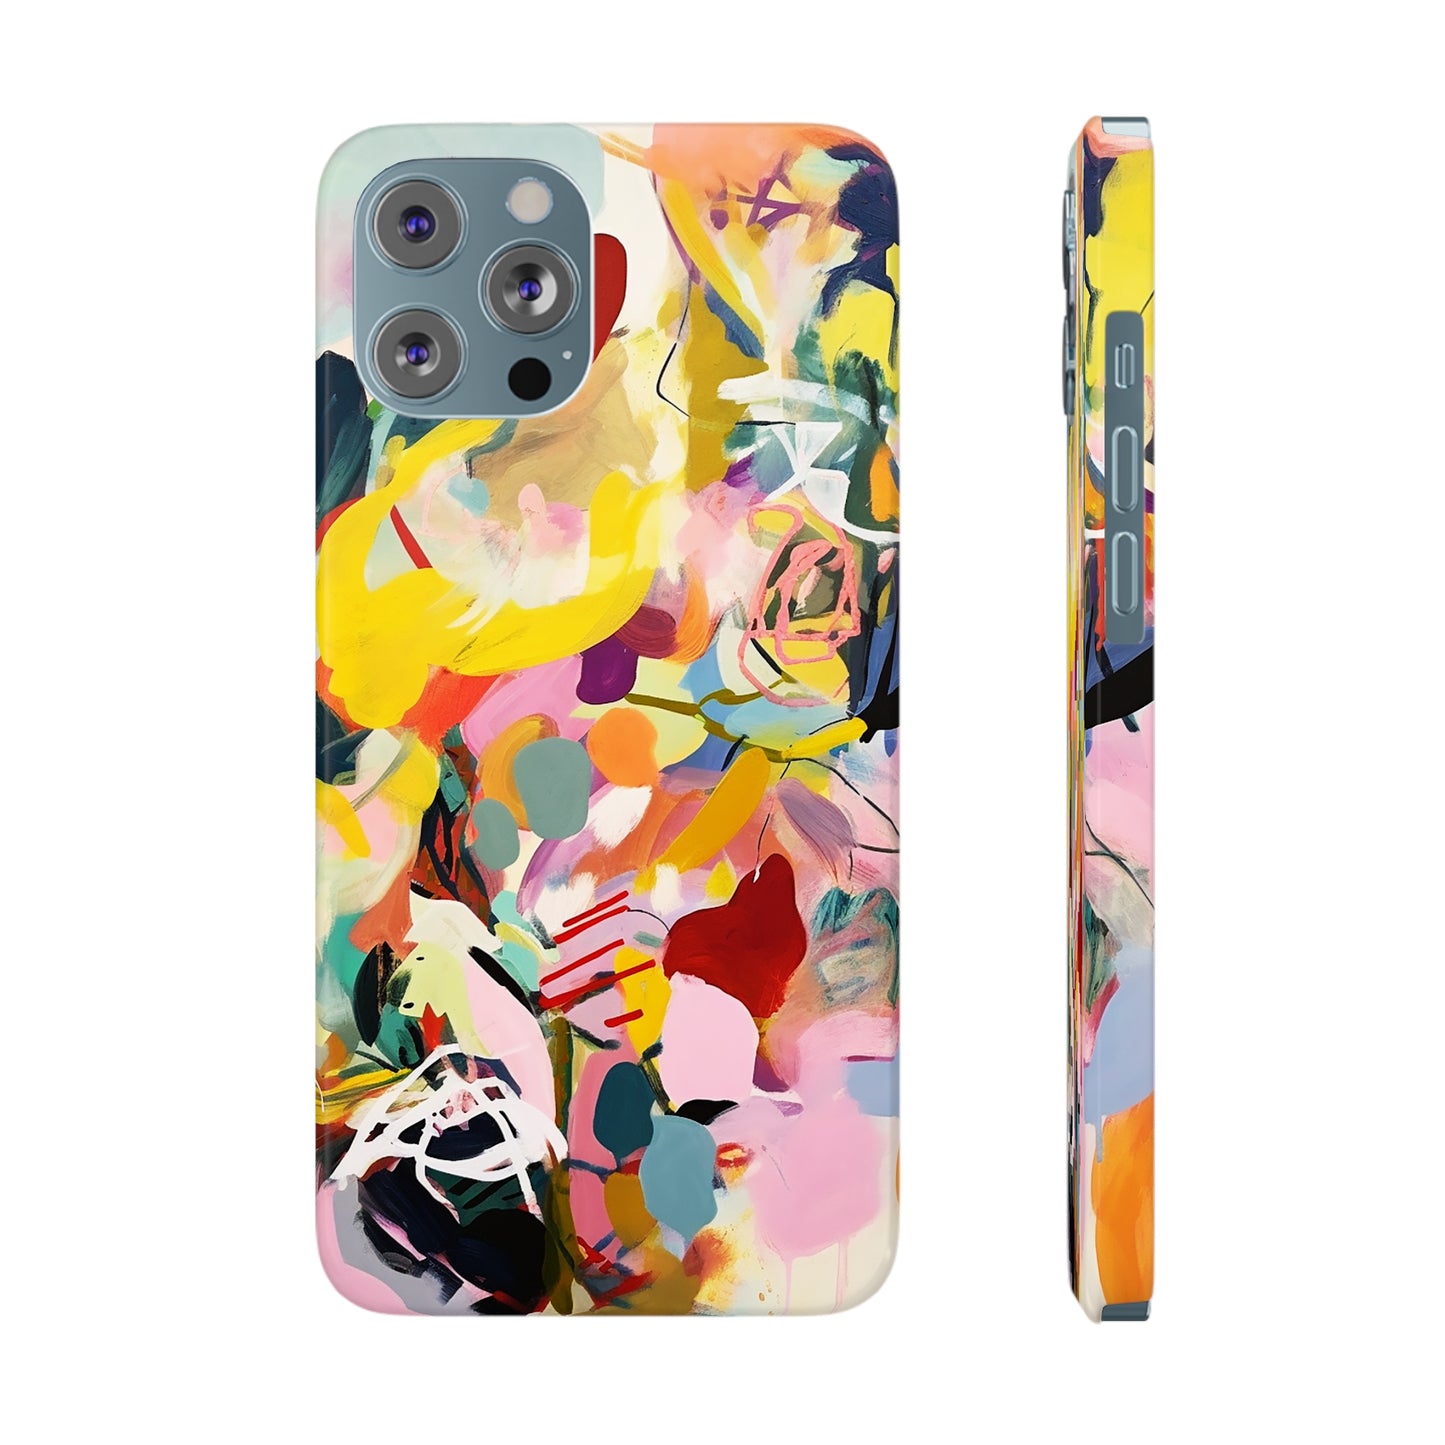 Bright Abstract Slim Phone iCases